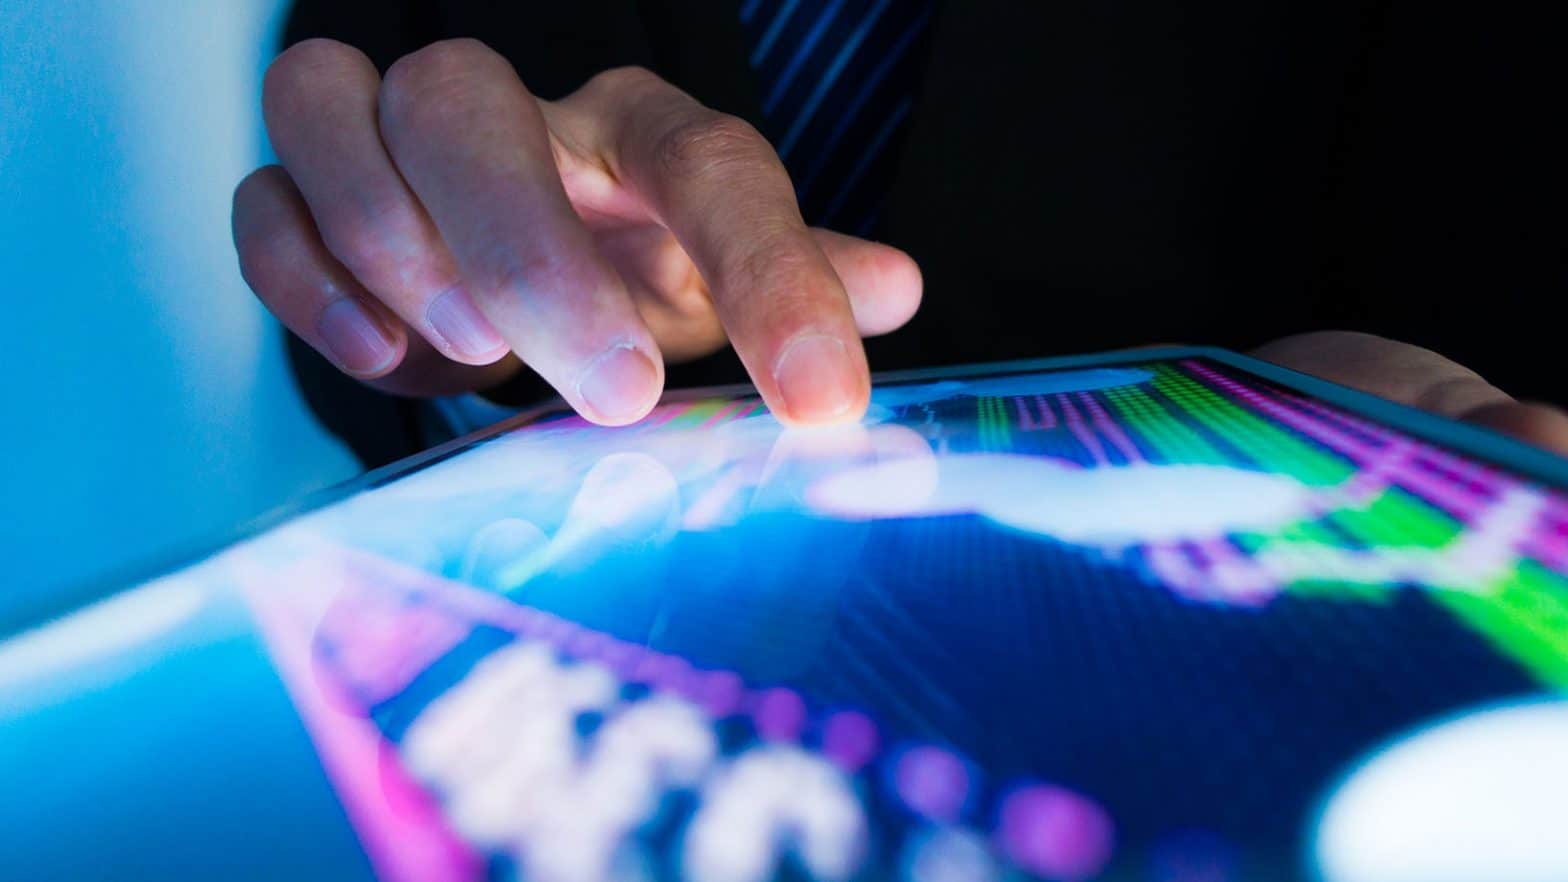 Market analyst using touch screen with data on it